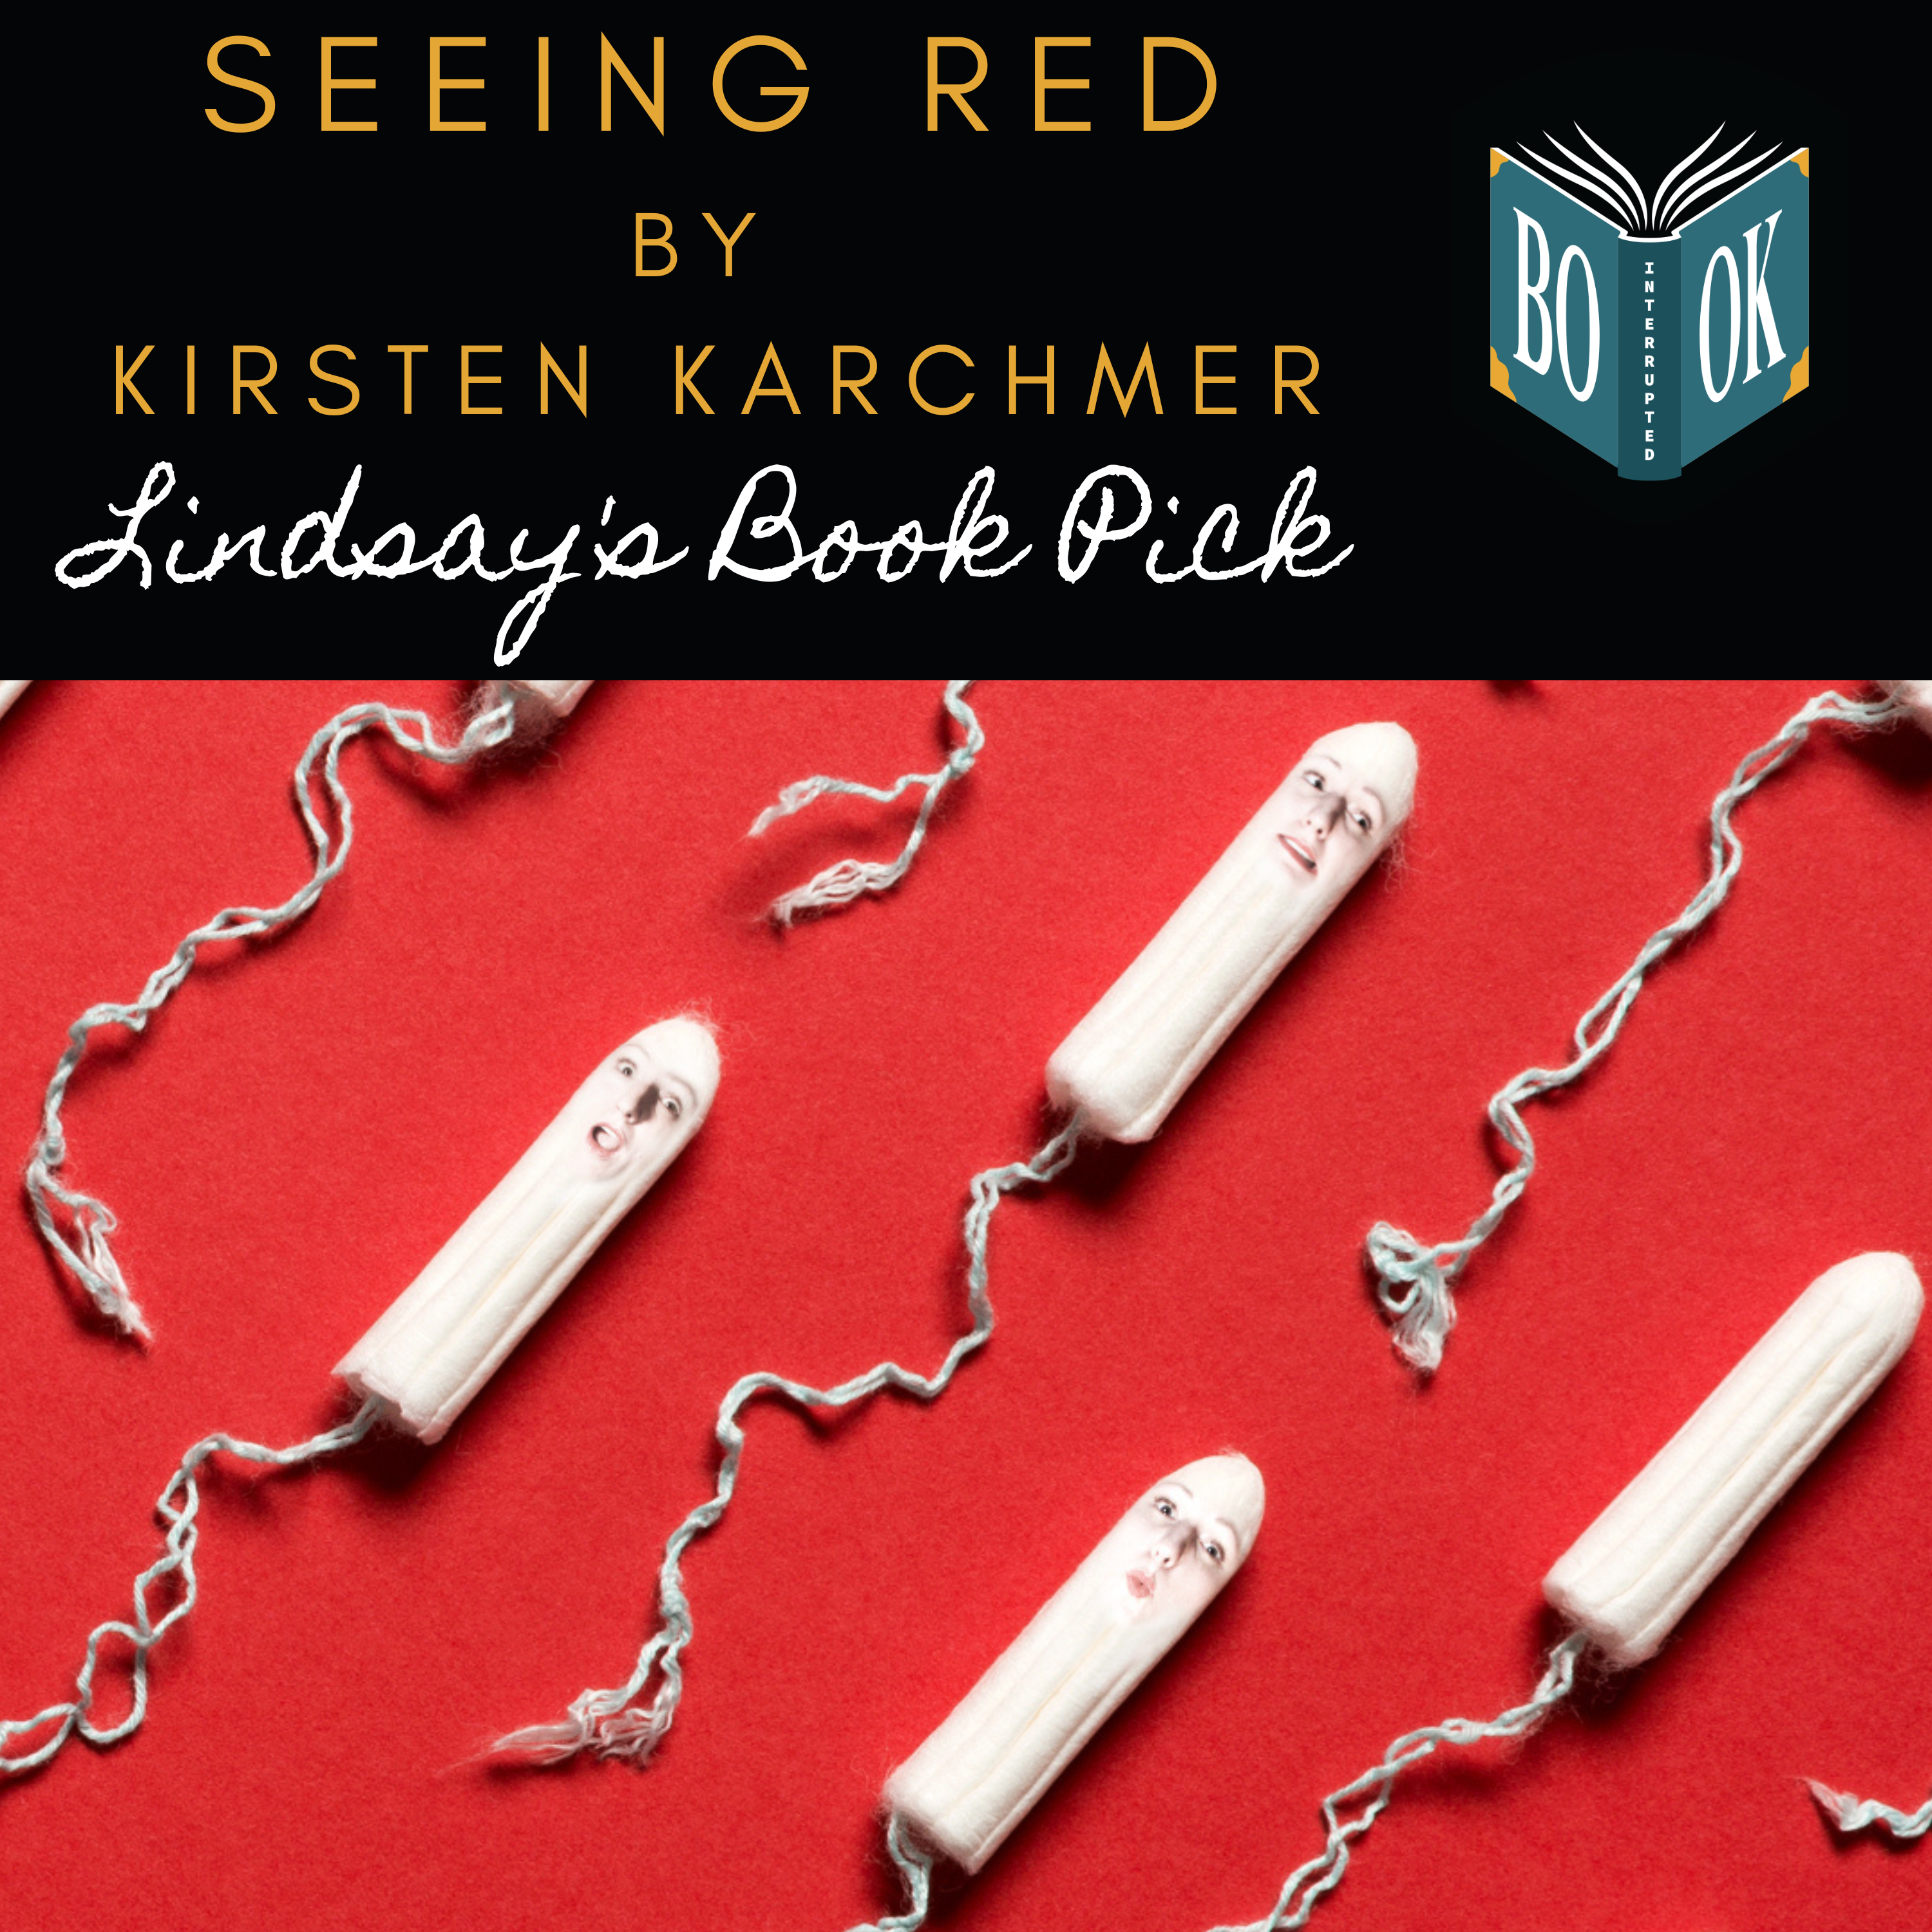 Seeing Red -BONUS Connecting with Kirsten Karchmer 